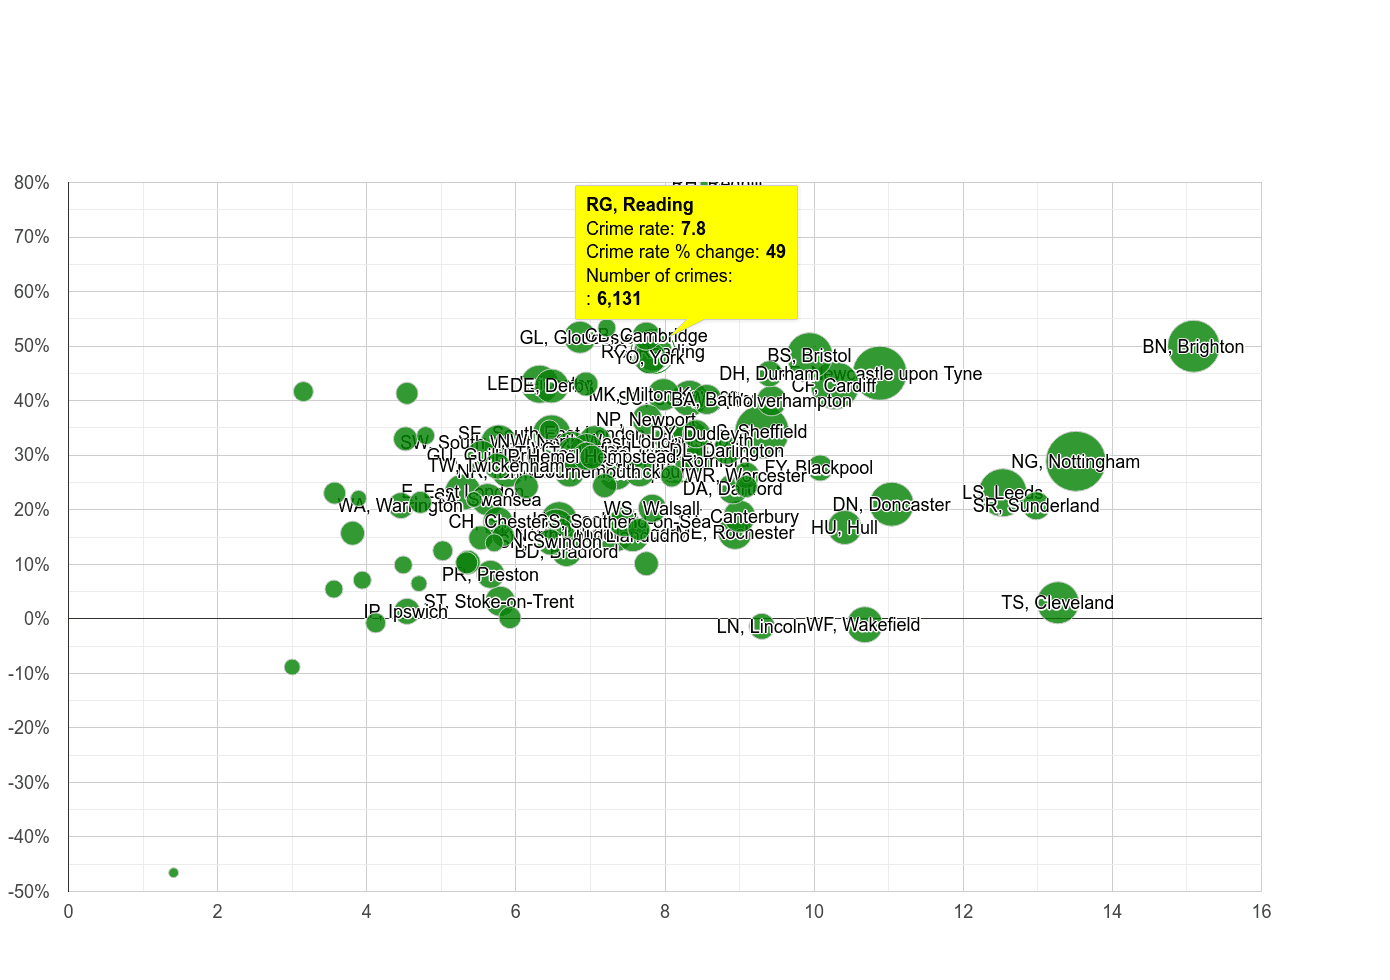 Reading shoplifting crime rate compared to other areas